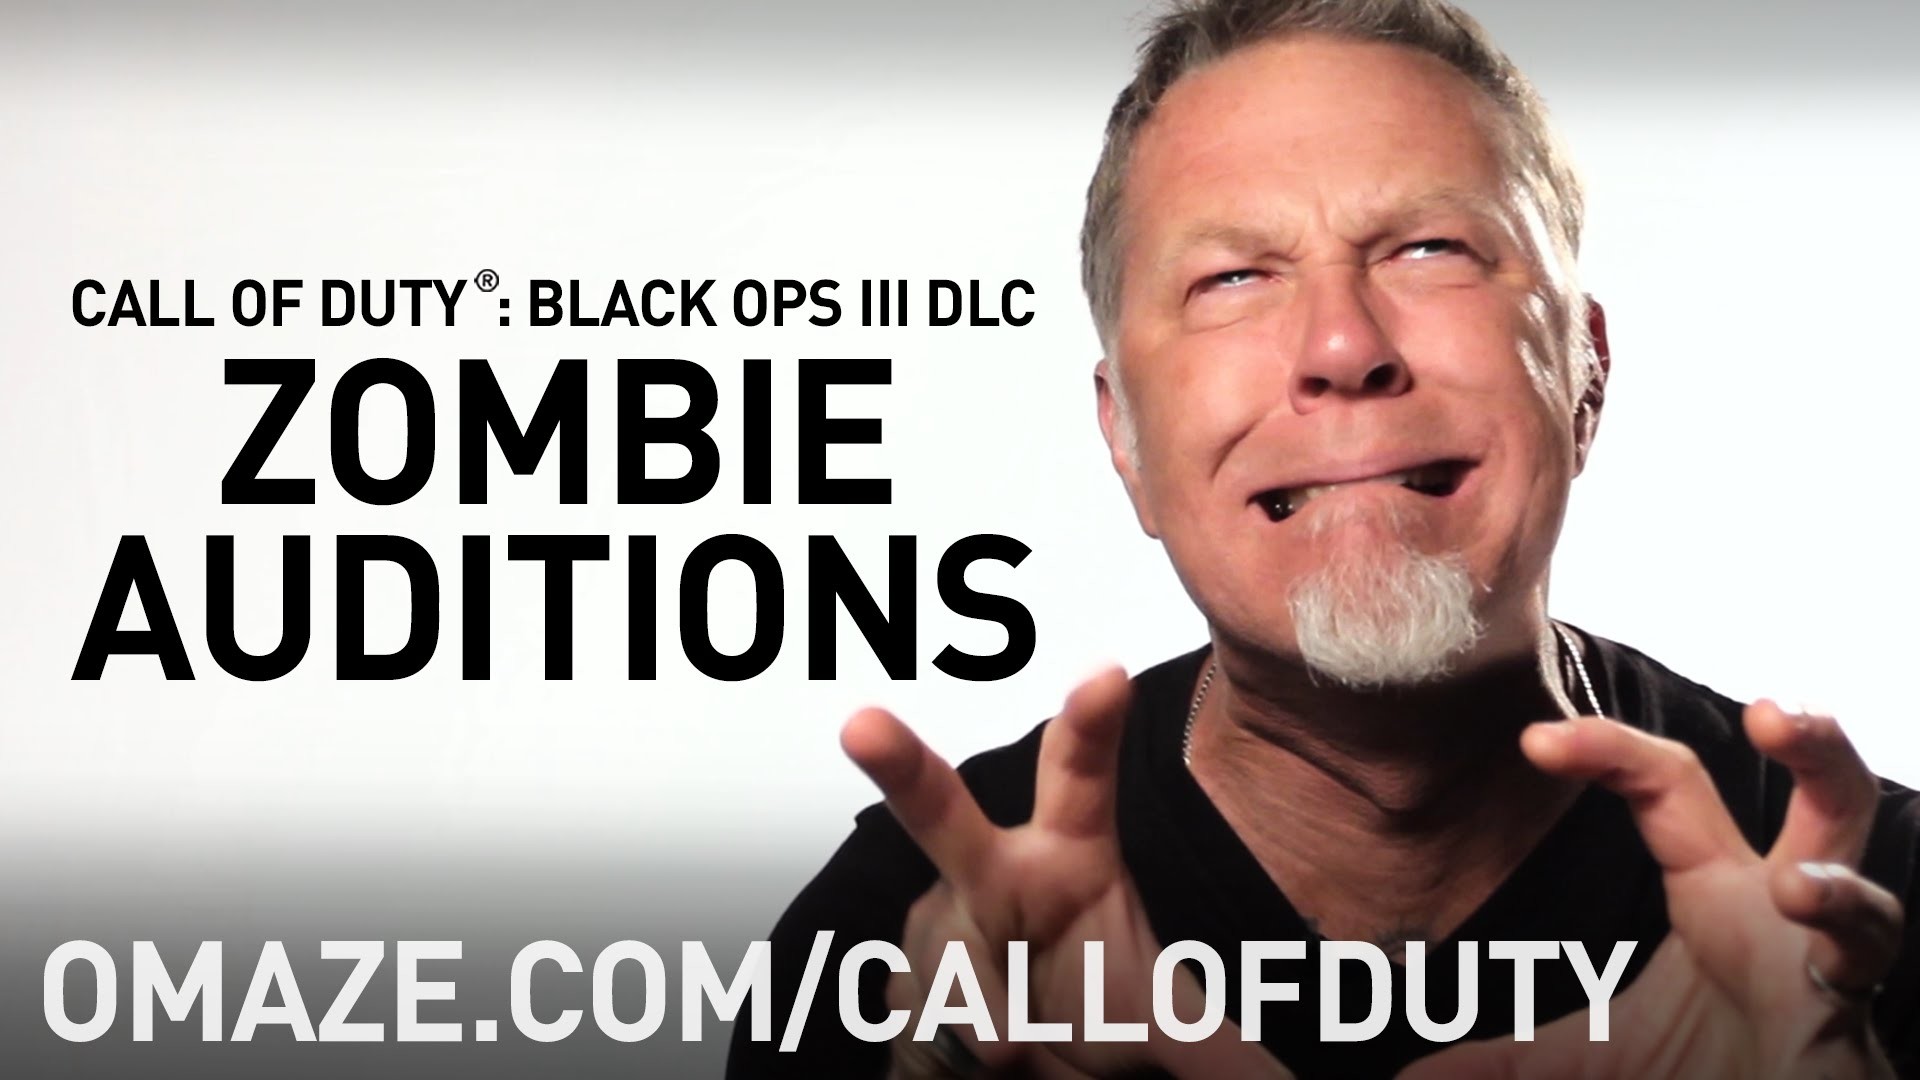 1920x1080 WATCH: James Hetfield, M. Shadows “Audition” For New “Call Of Duty” Game -  WDHA FM